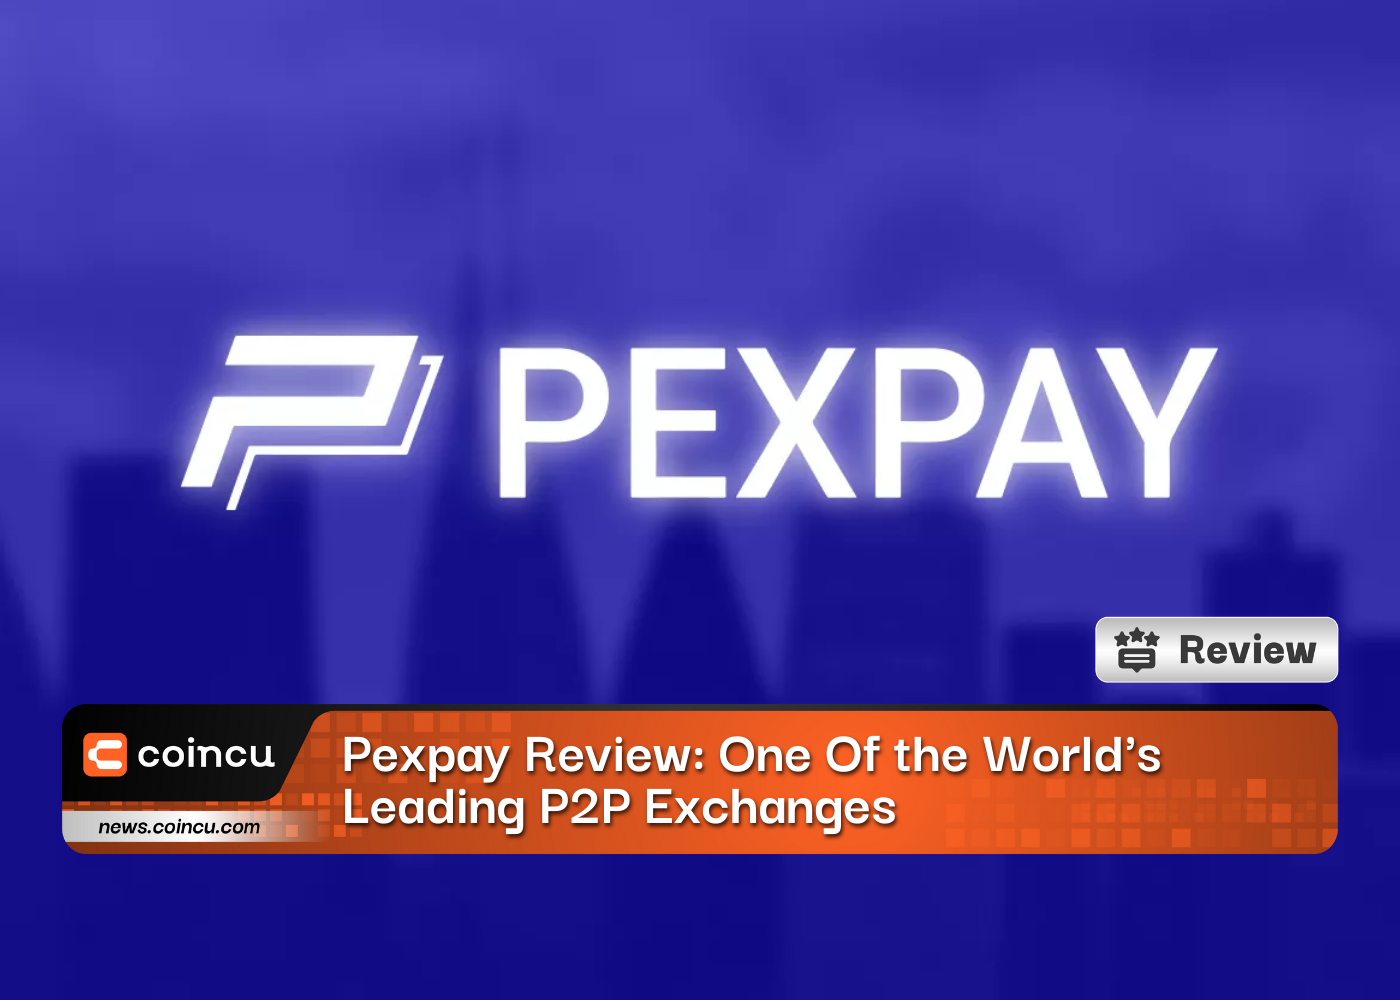 Pexpay Review: One Of the World's Leading P2P Exchanges